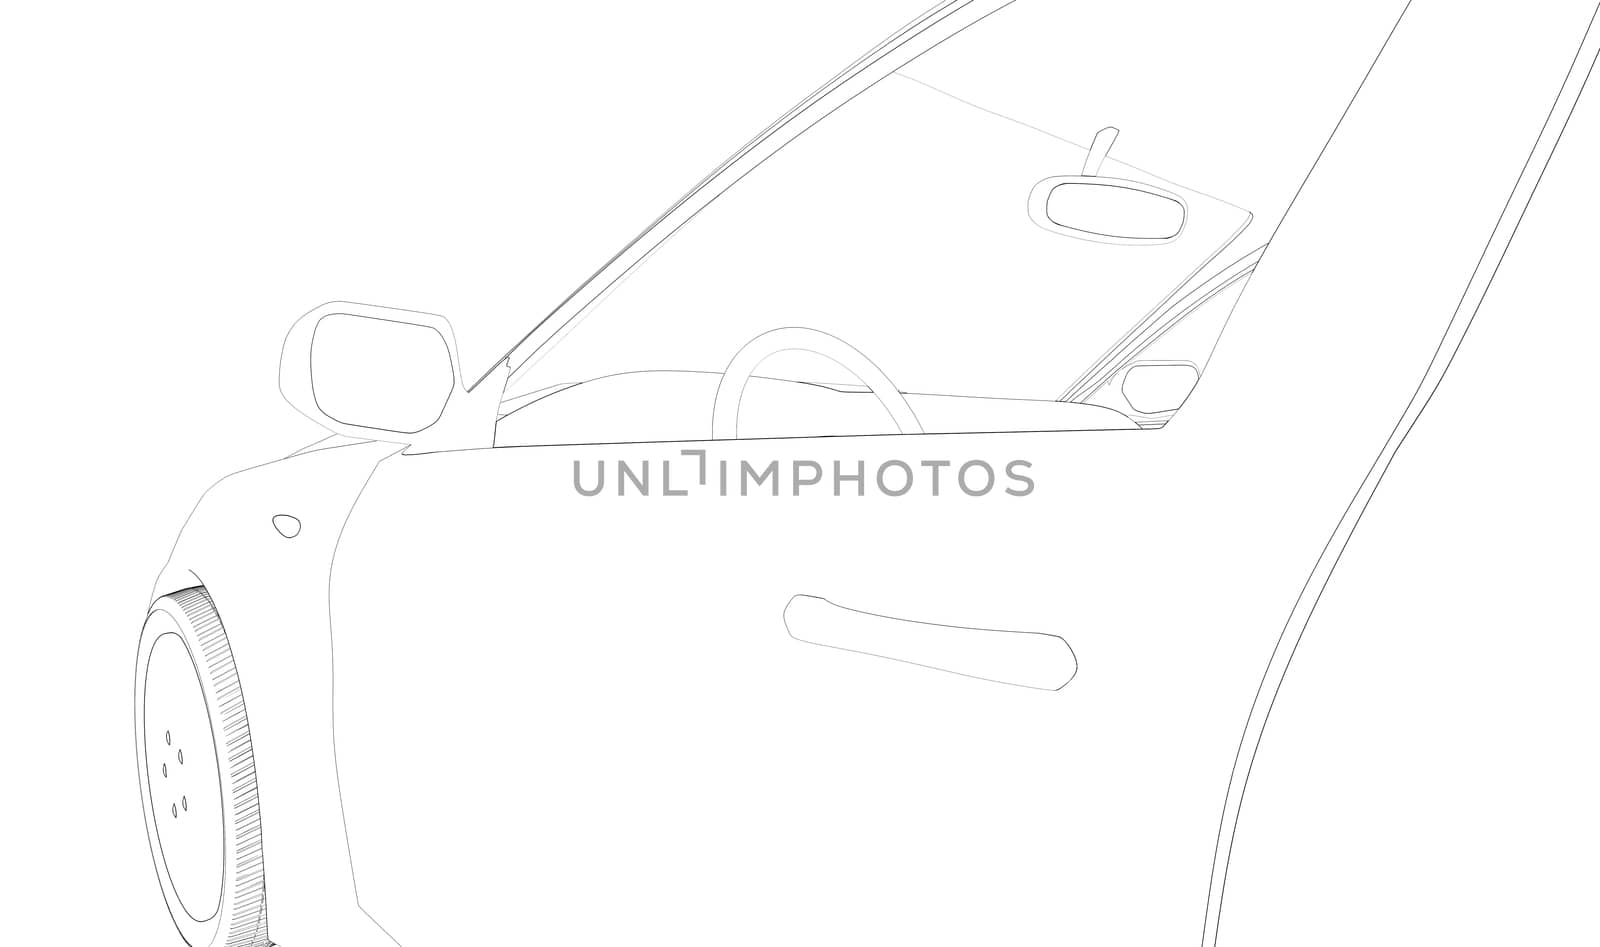 Graphic design of car model on isolated white background, close-up view